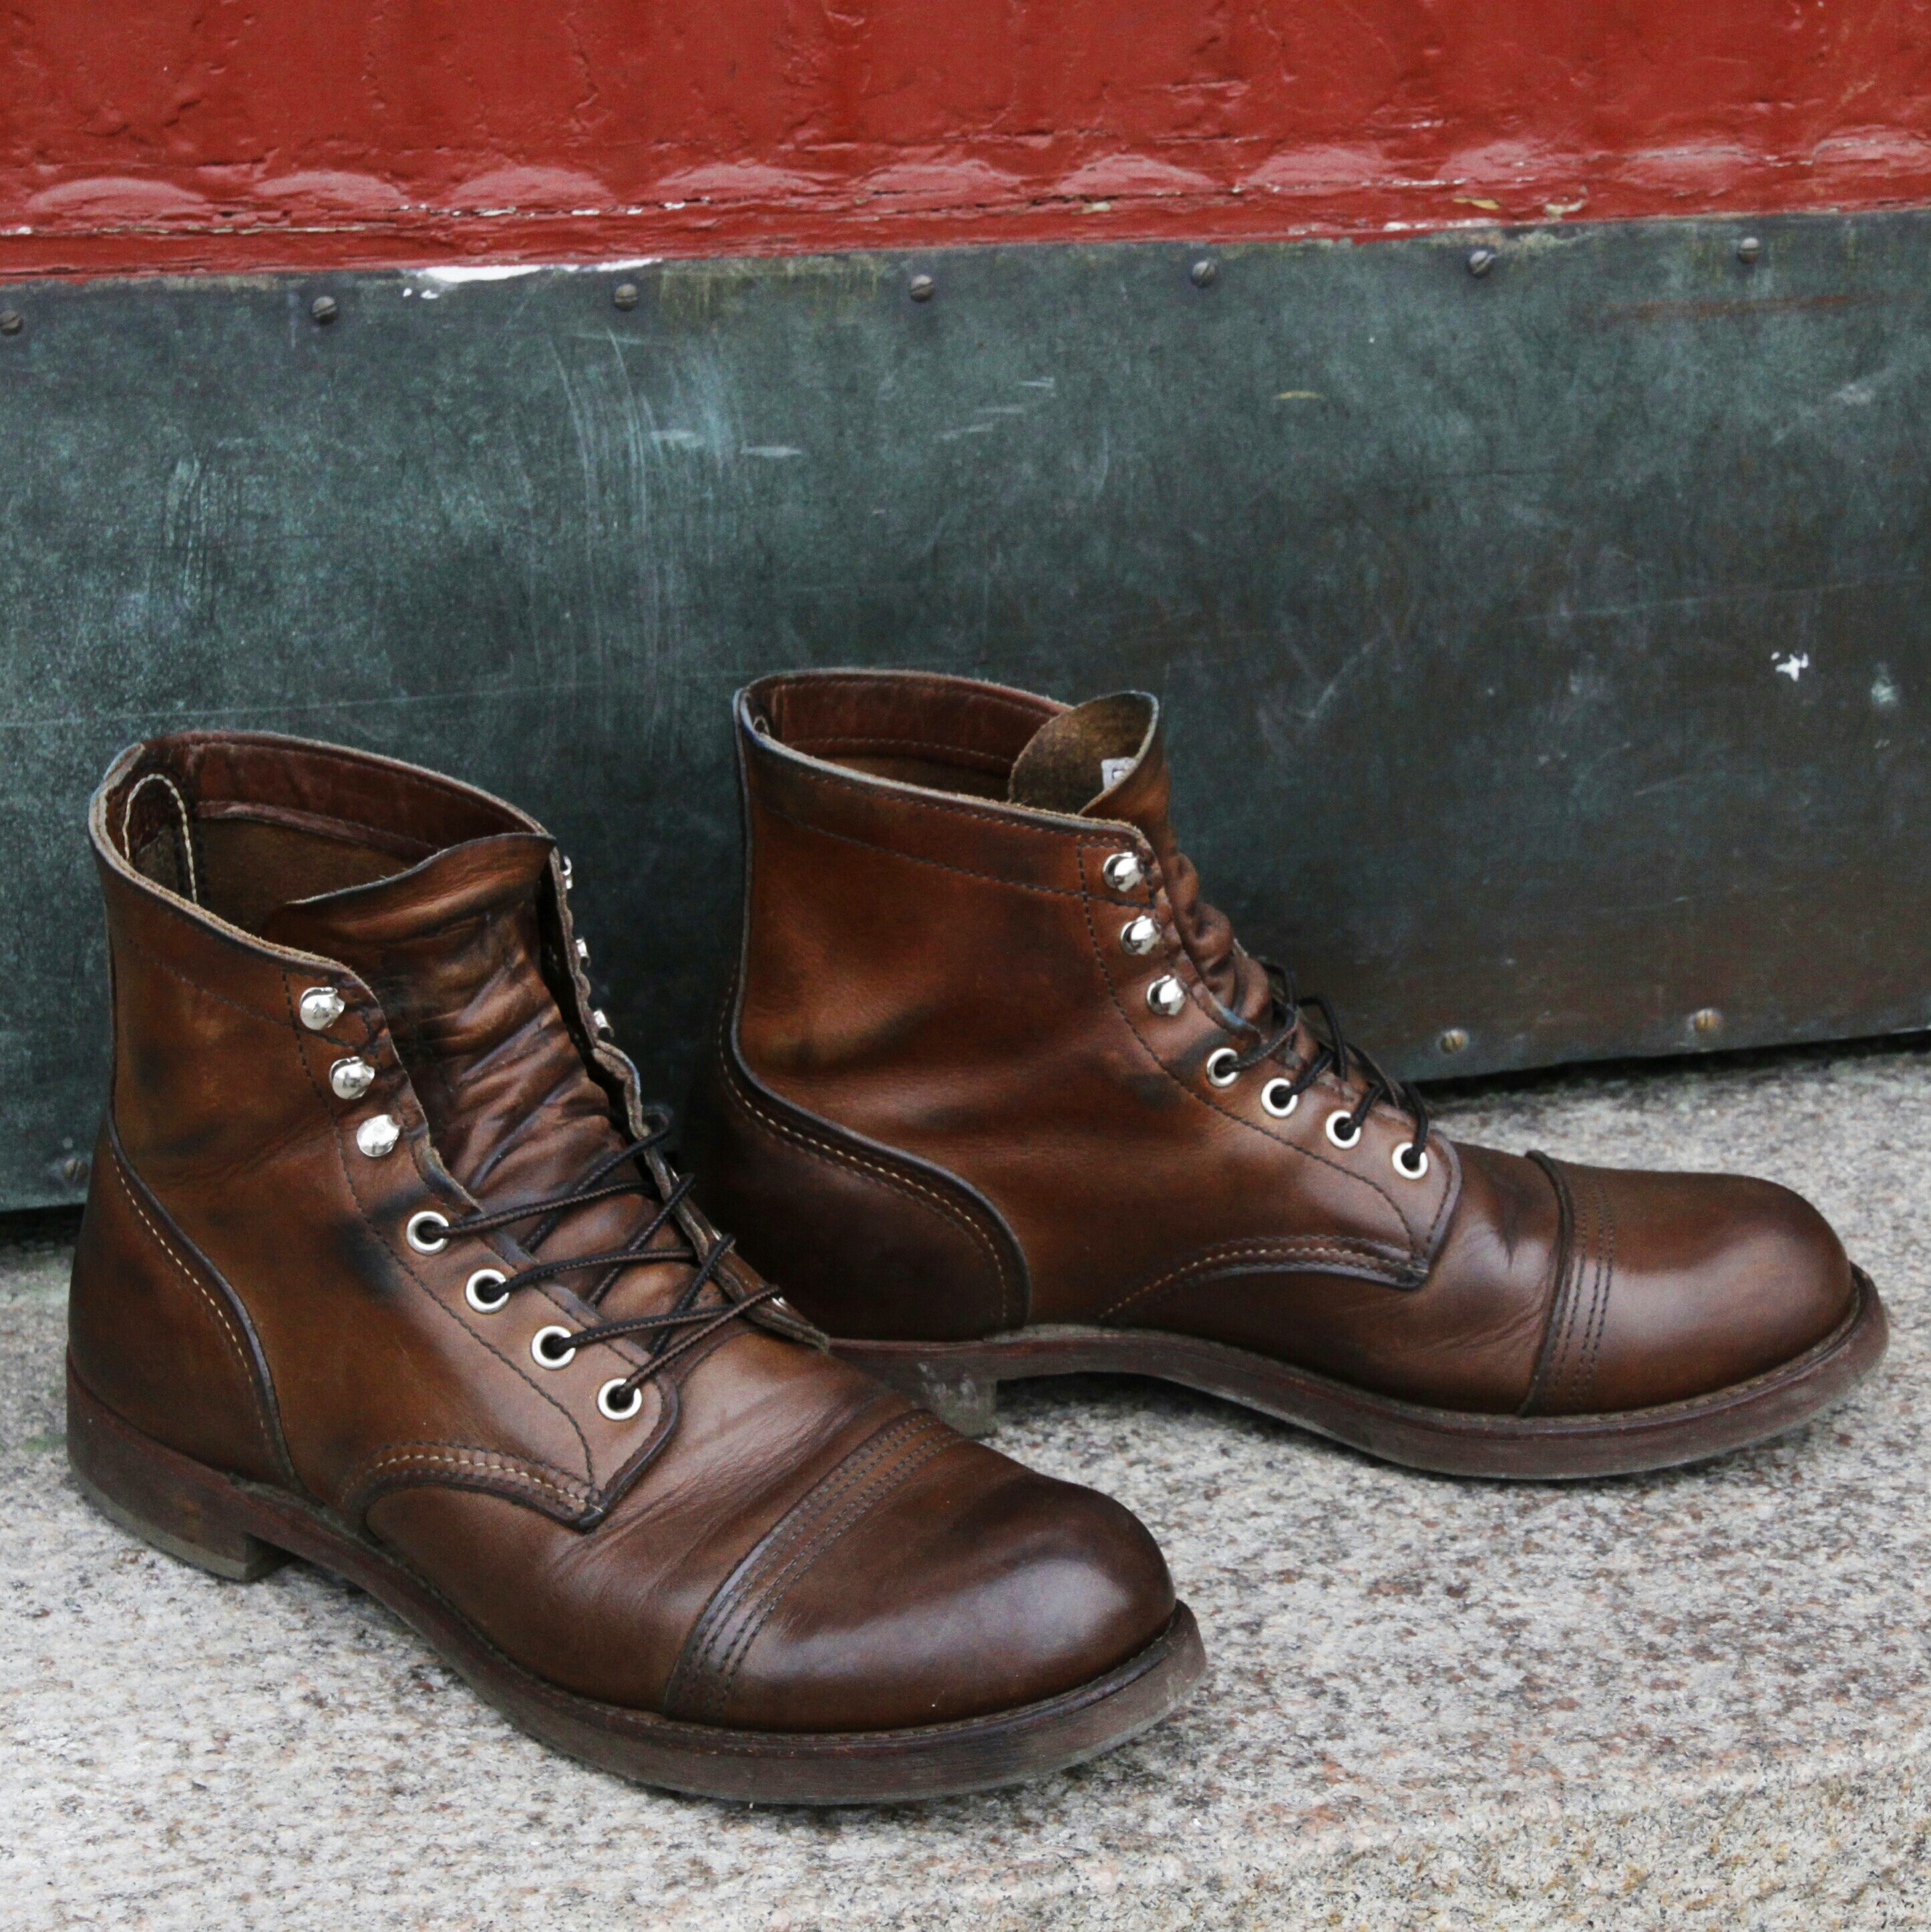 Fade of the Day - Red Wing 8111 Iron Ranger (3 Years)